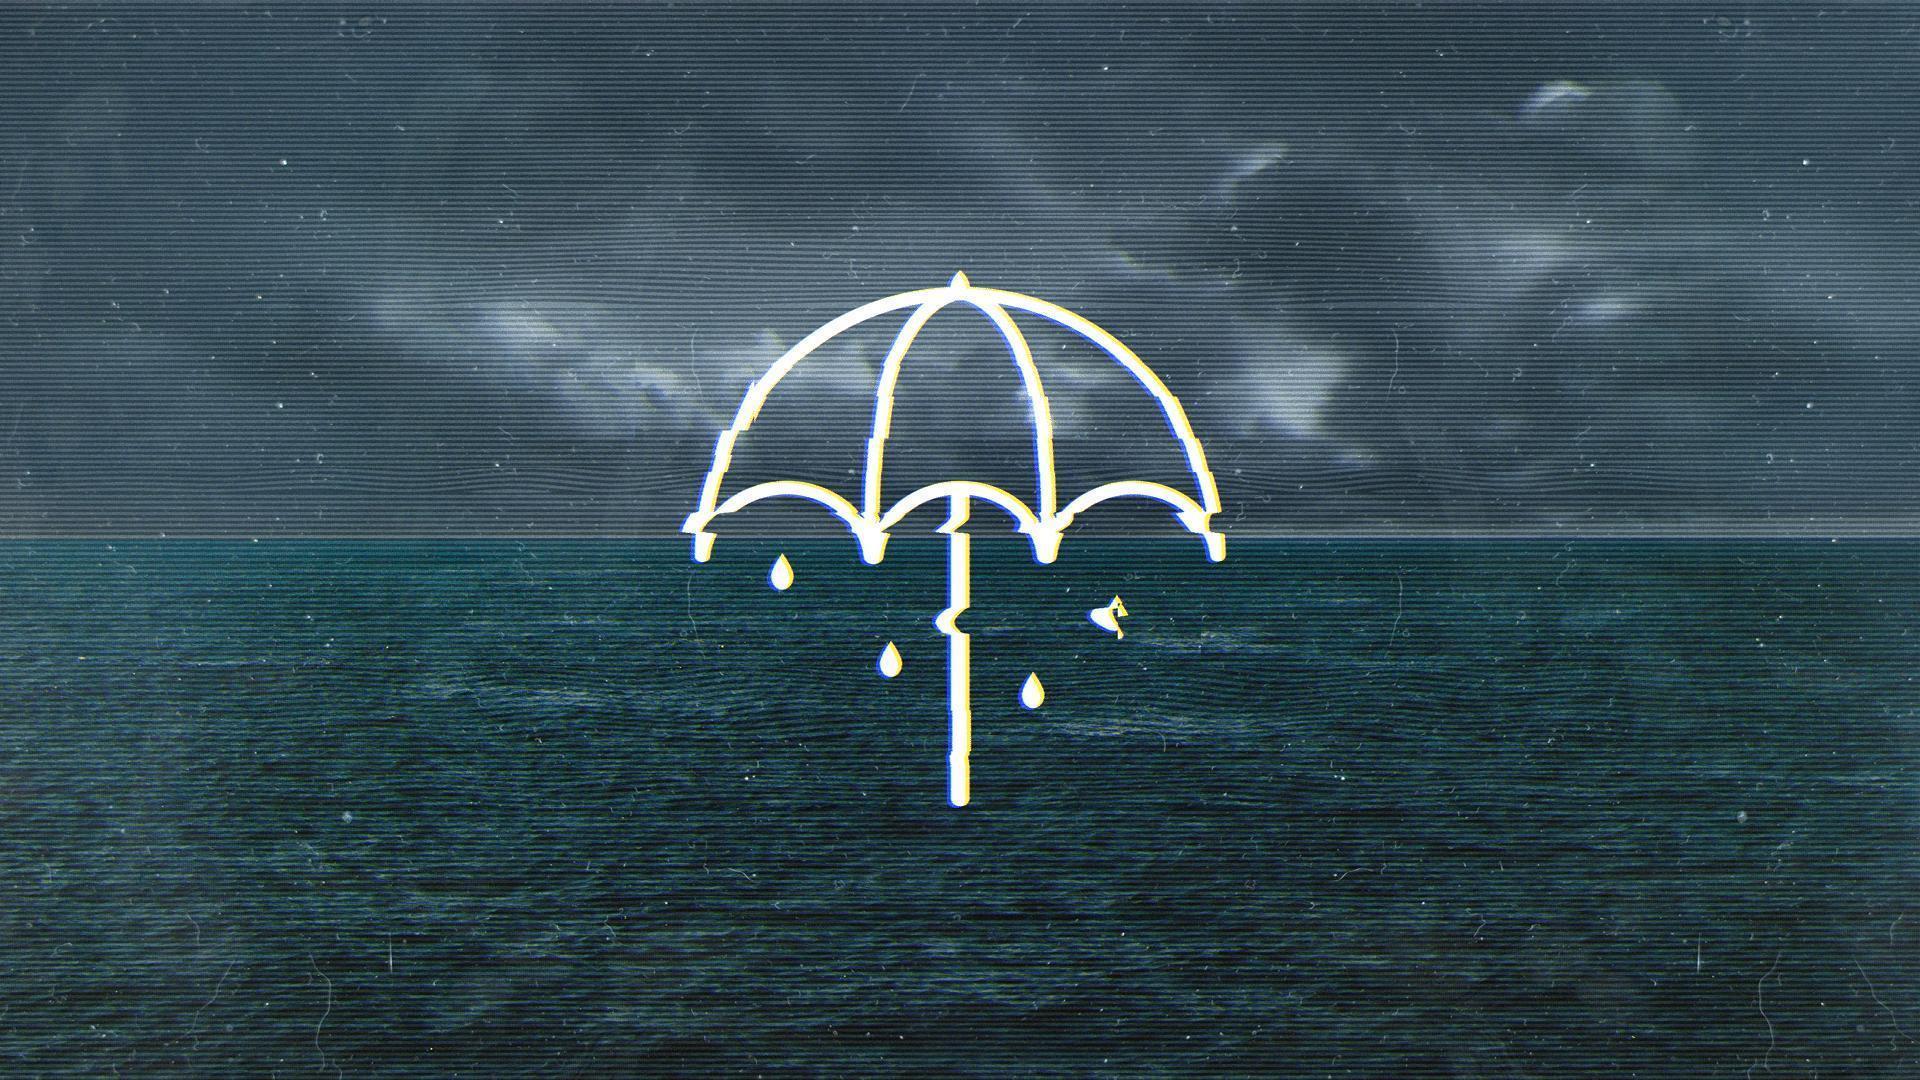 Just made a quick wallpaper with the umbrella logo. I&;ll be taking